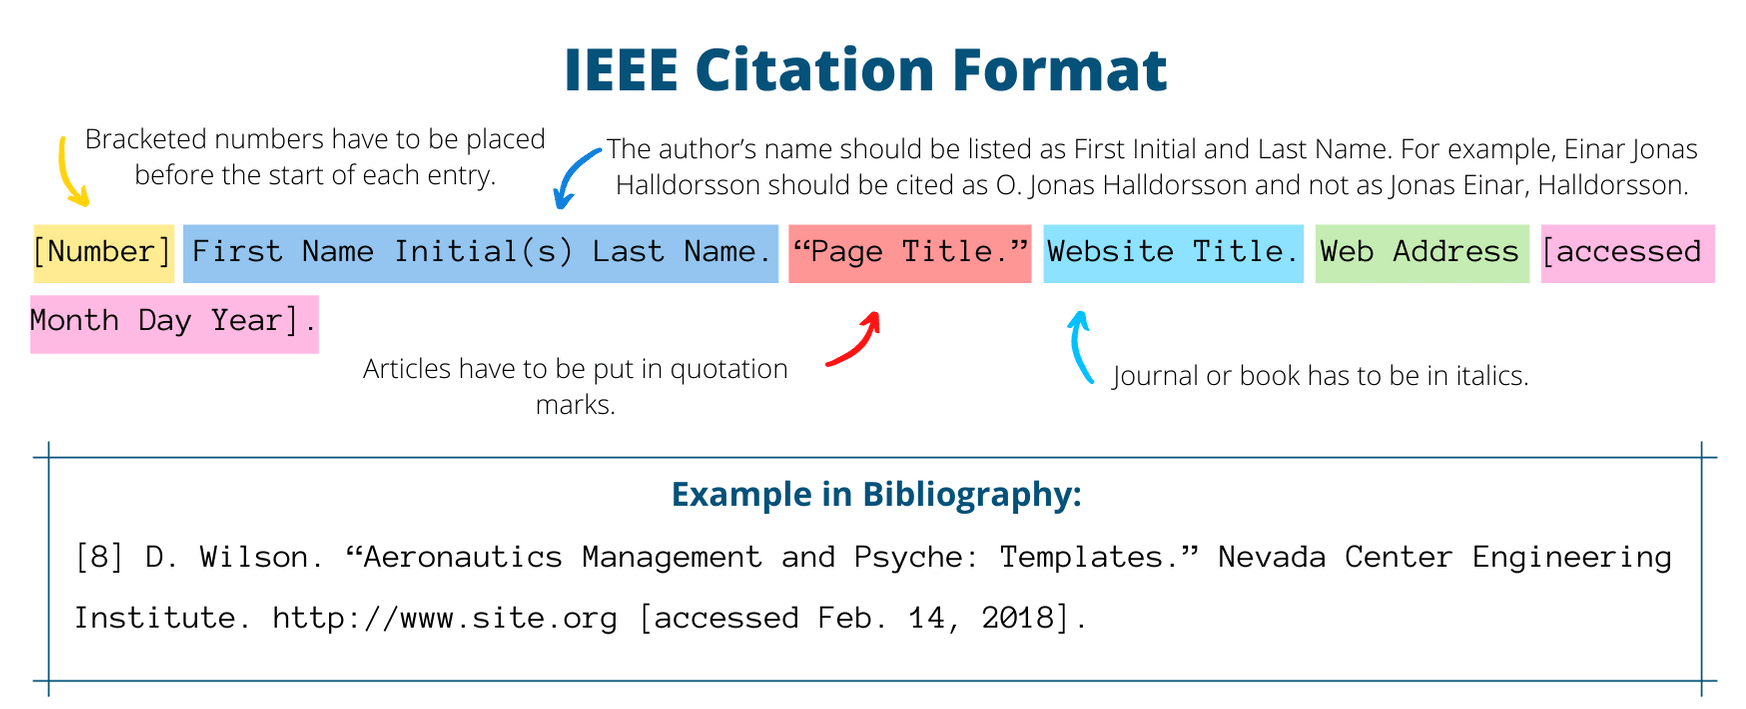 thesis citation ieee